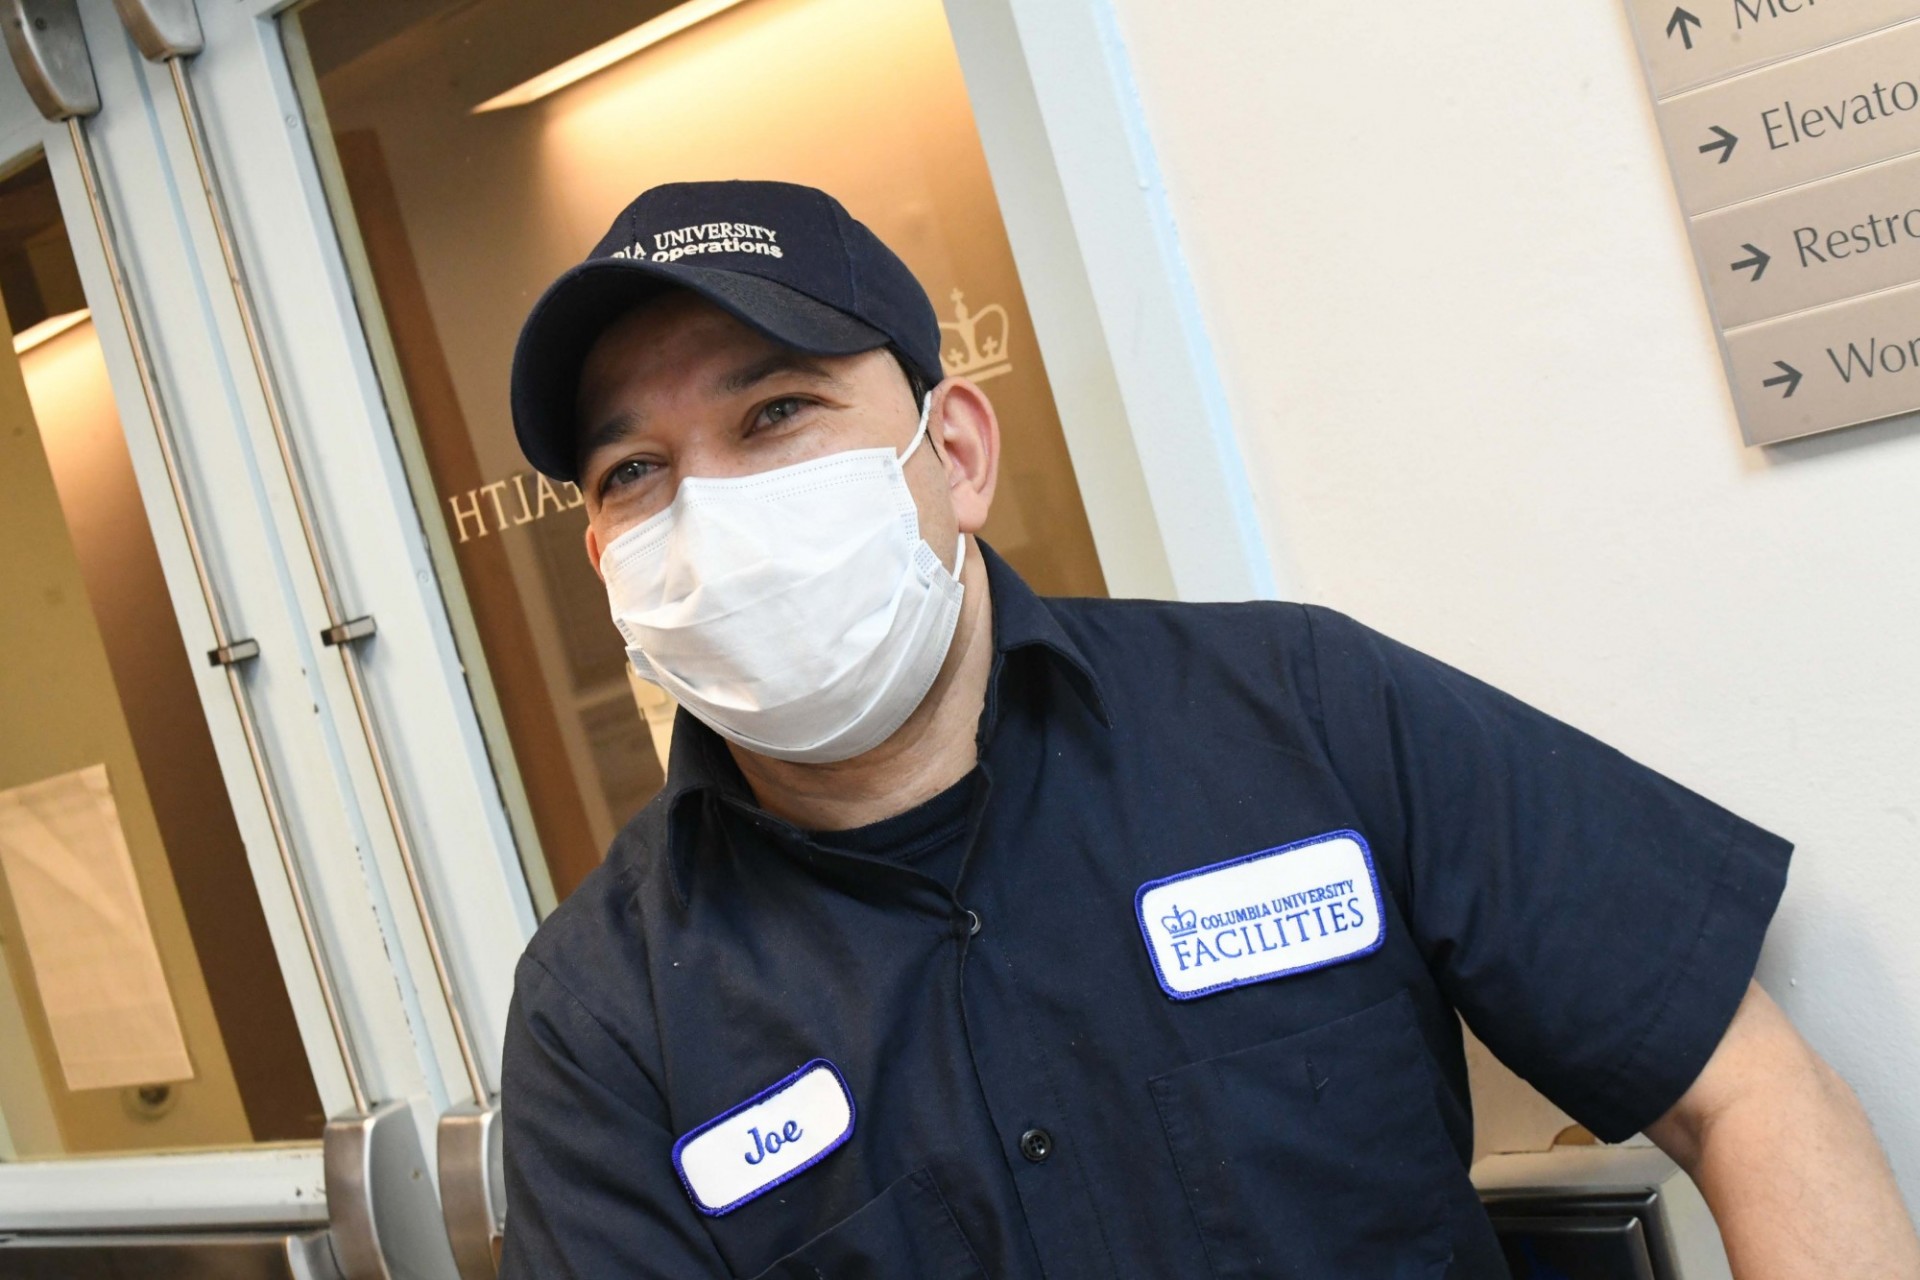 A man in a blue custodial uniform is wearing a mask and standing in front of a doorway.